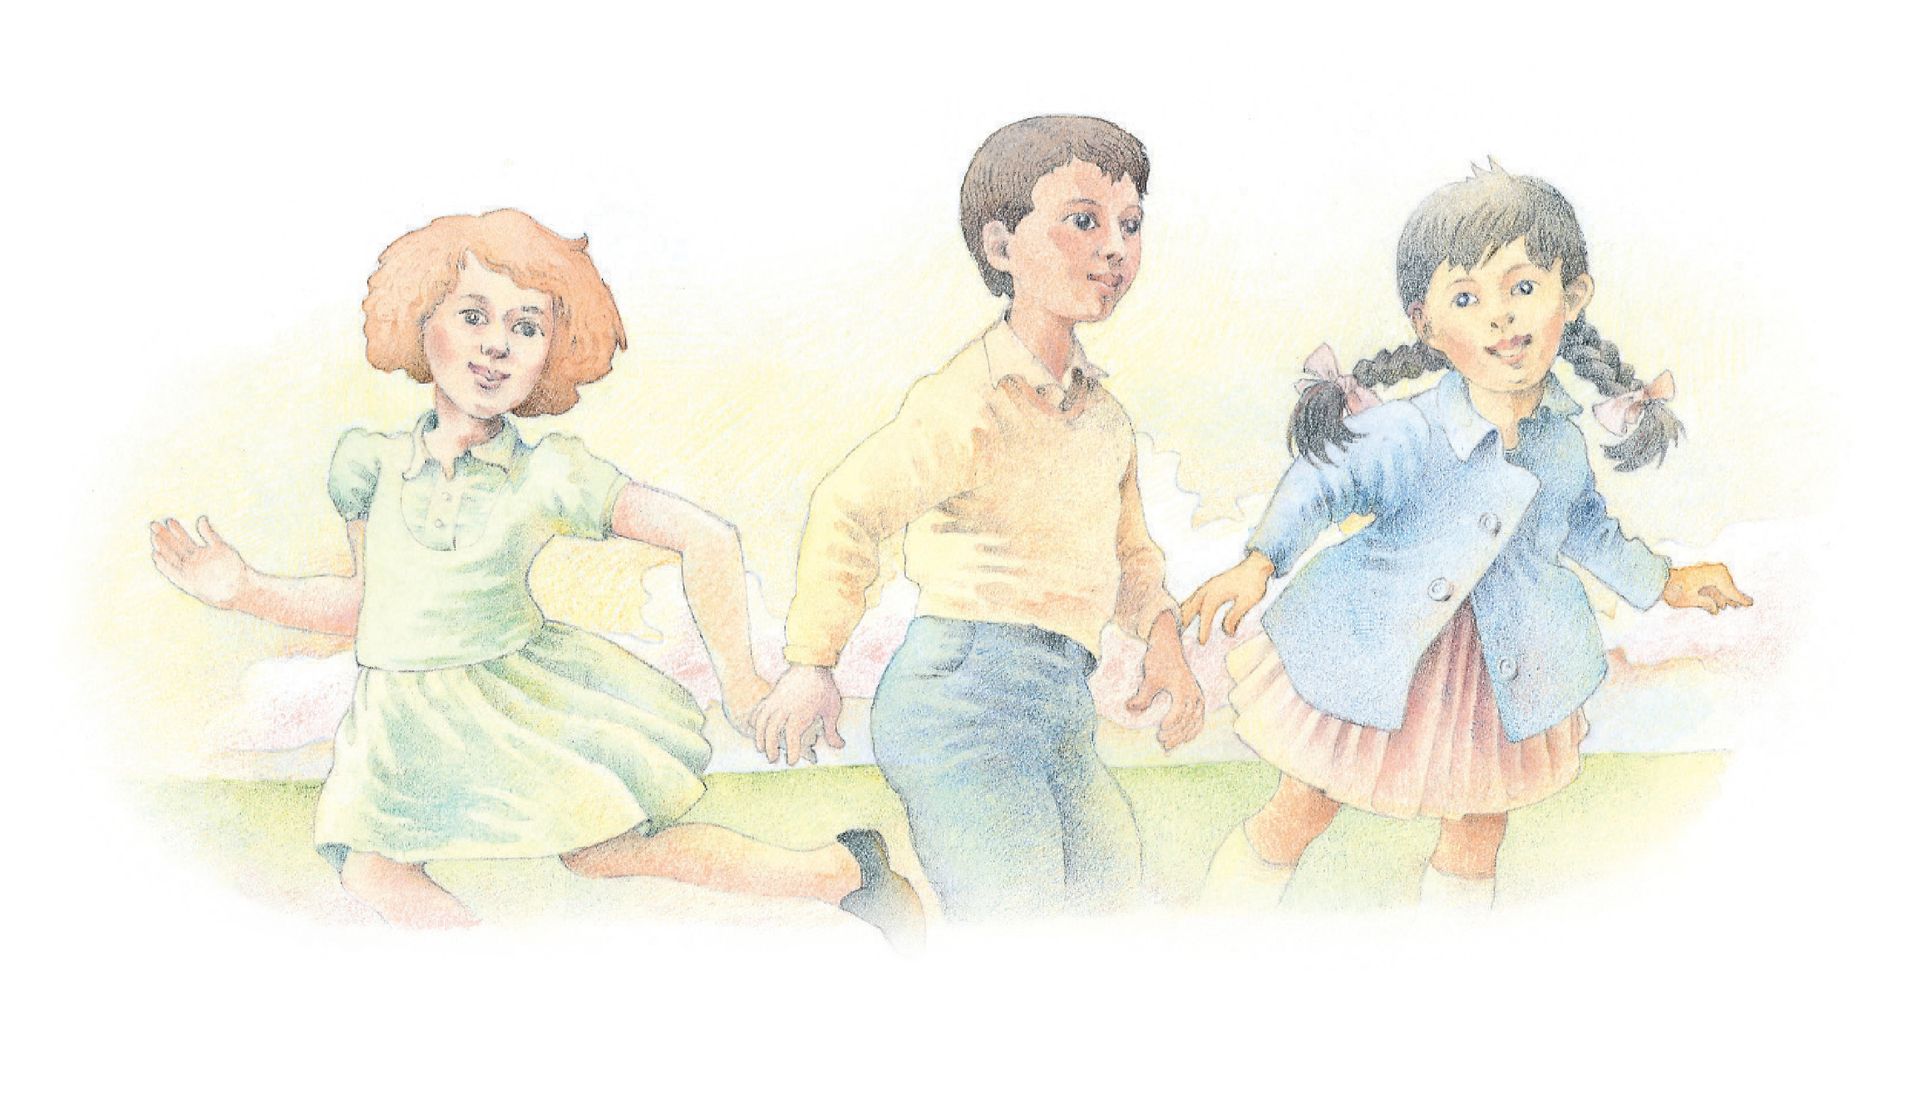 Three children run and play together. From the Children’s Songbook, page 255, “Come with Me to Primary”; watercolor illustration by Richard Hull.